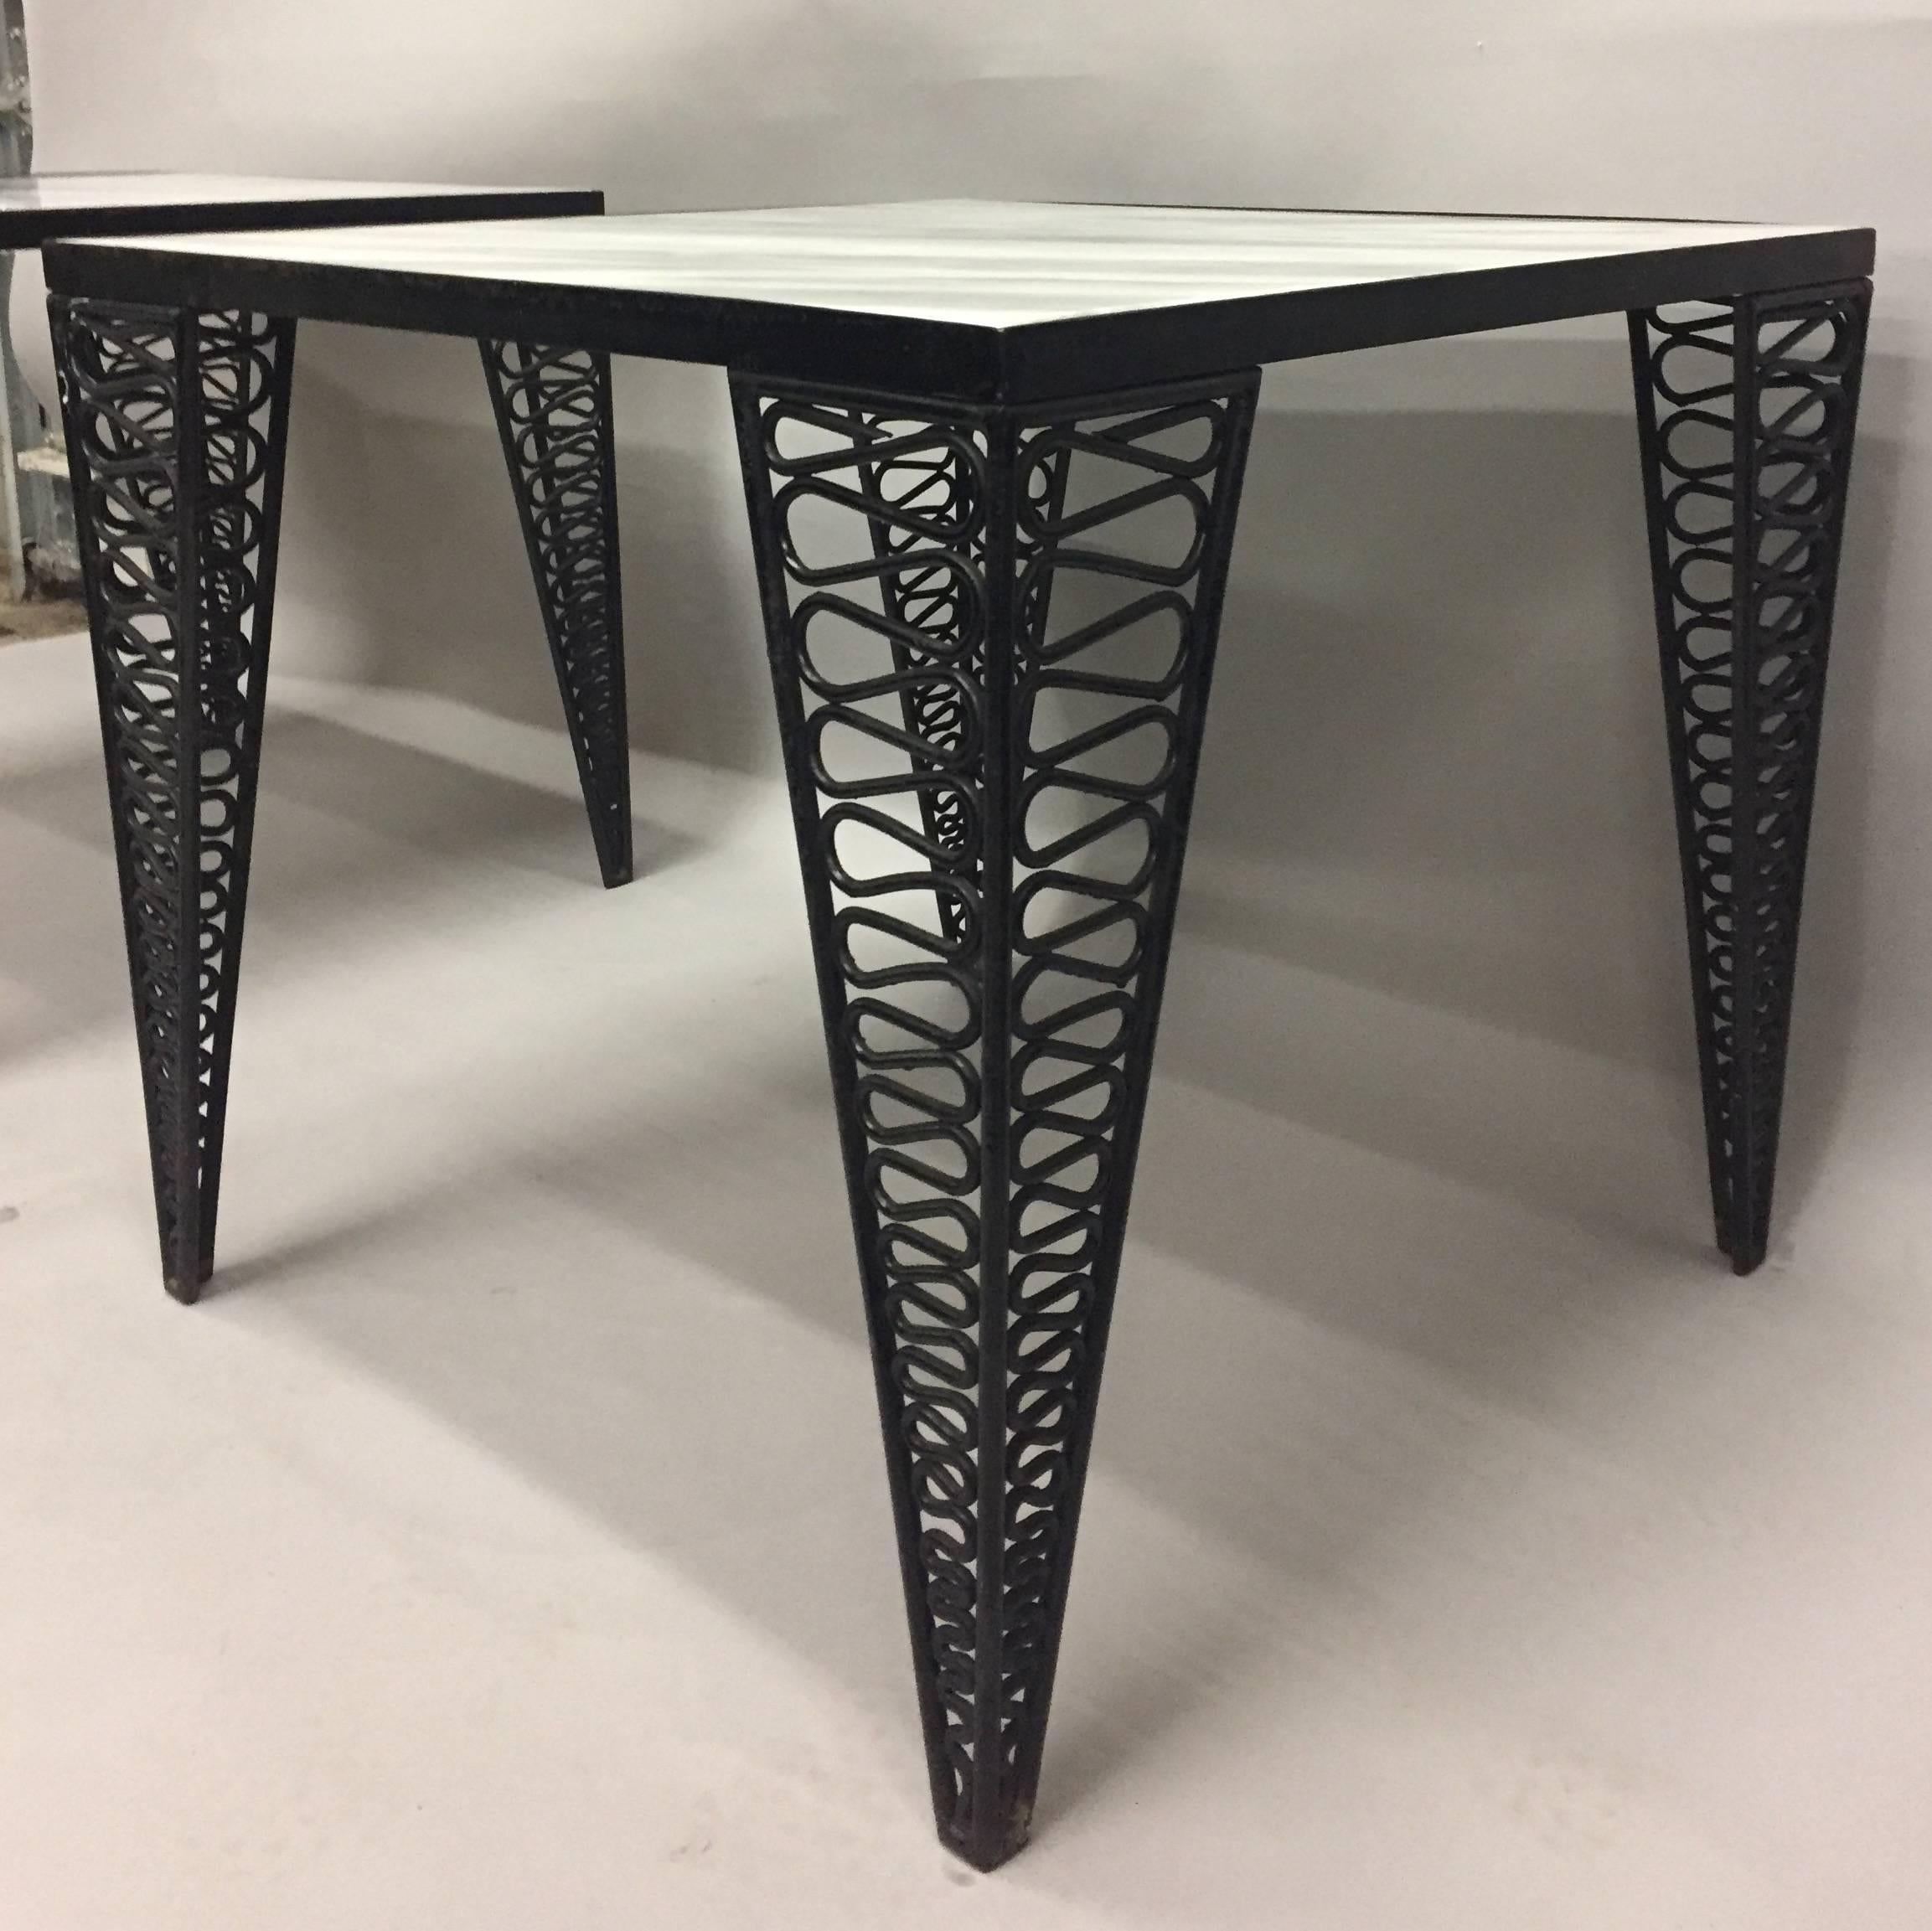 Two sophisticated end tables having black iron bases by Tempestini for Salterini, stylish triangular legs with decorative mesh like pattern, and sleek white and grey veined marble tops.